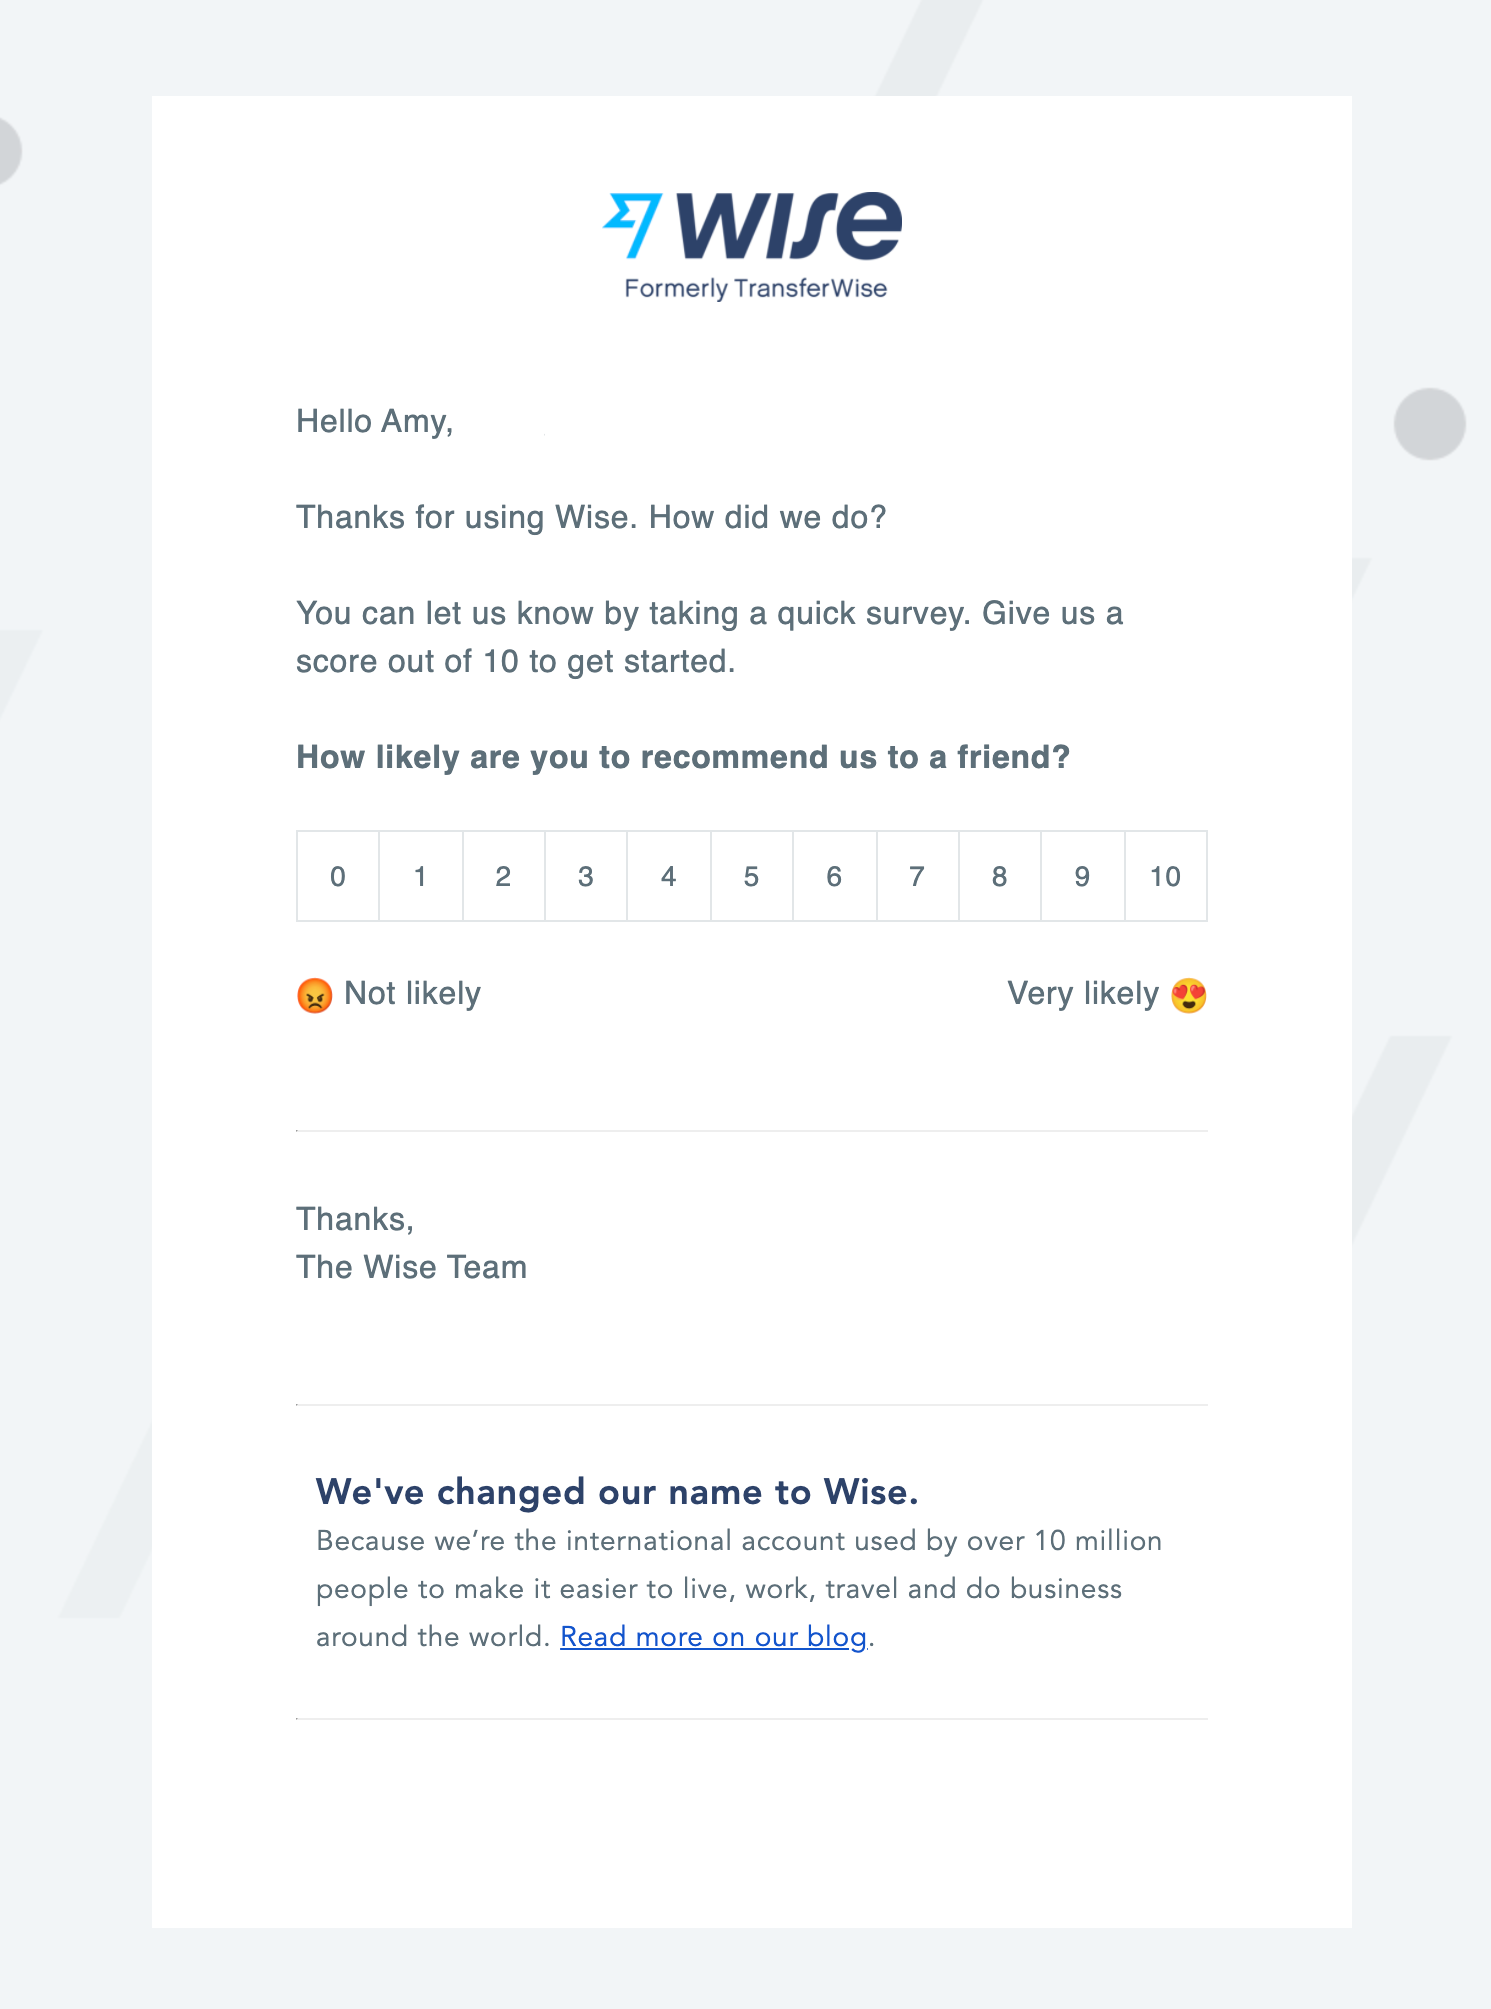 Wise interactive email example with NPS feedback scale